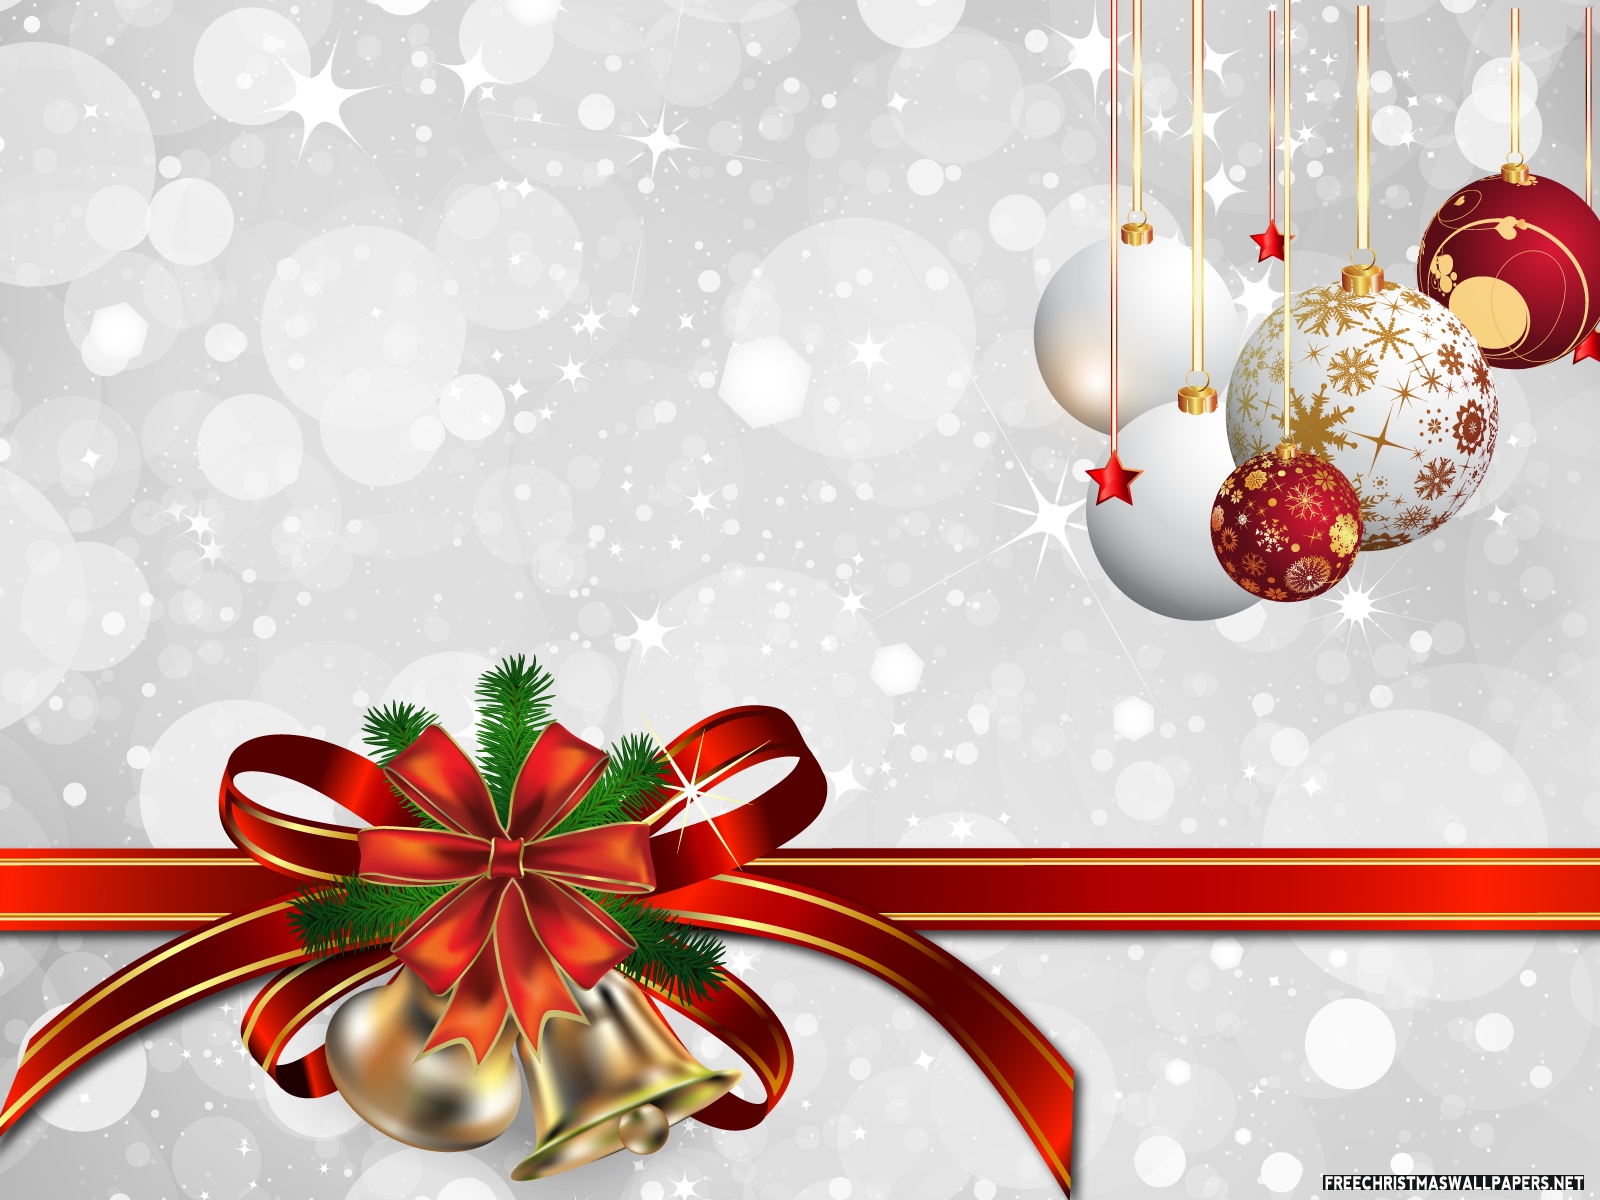 45 New Free Collection of HD Christmas Wallpapers PSDreview